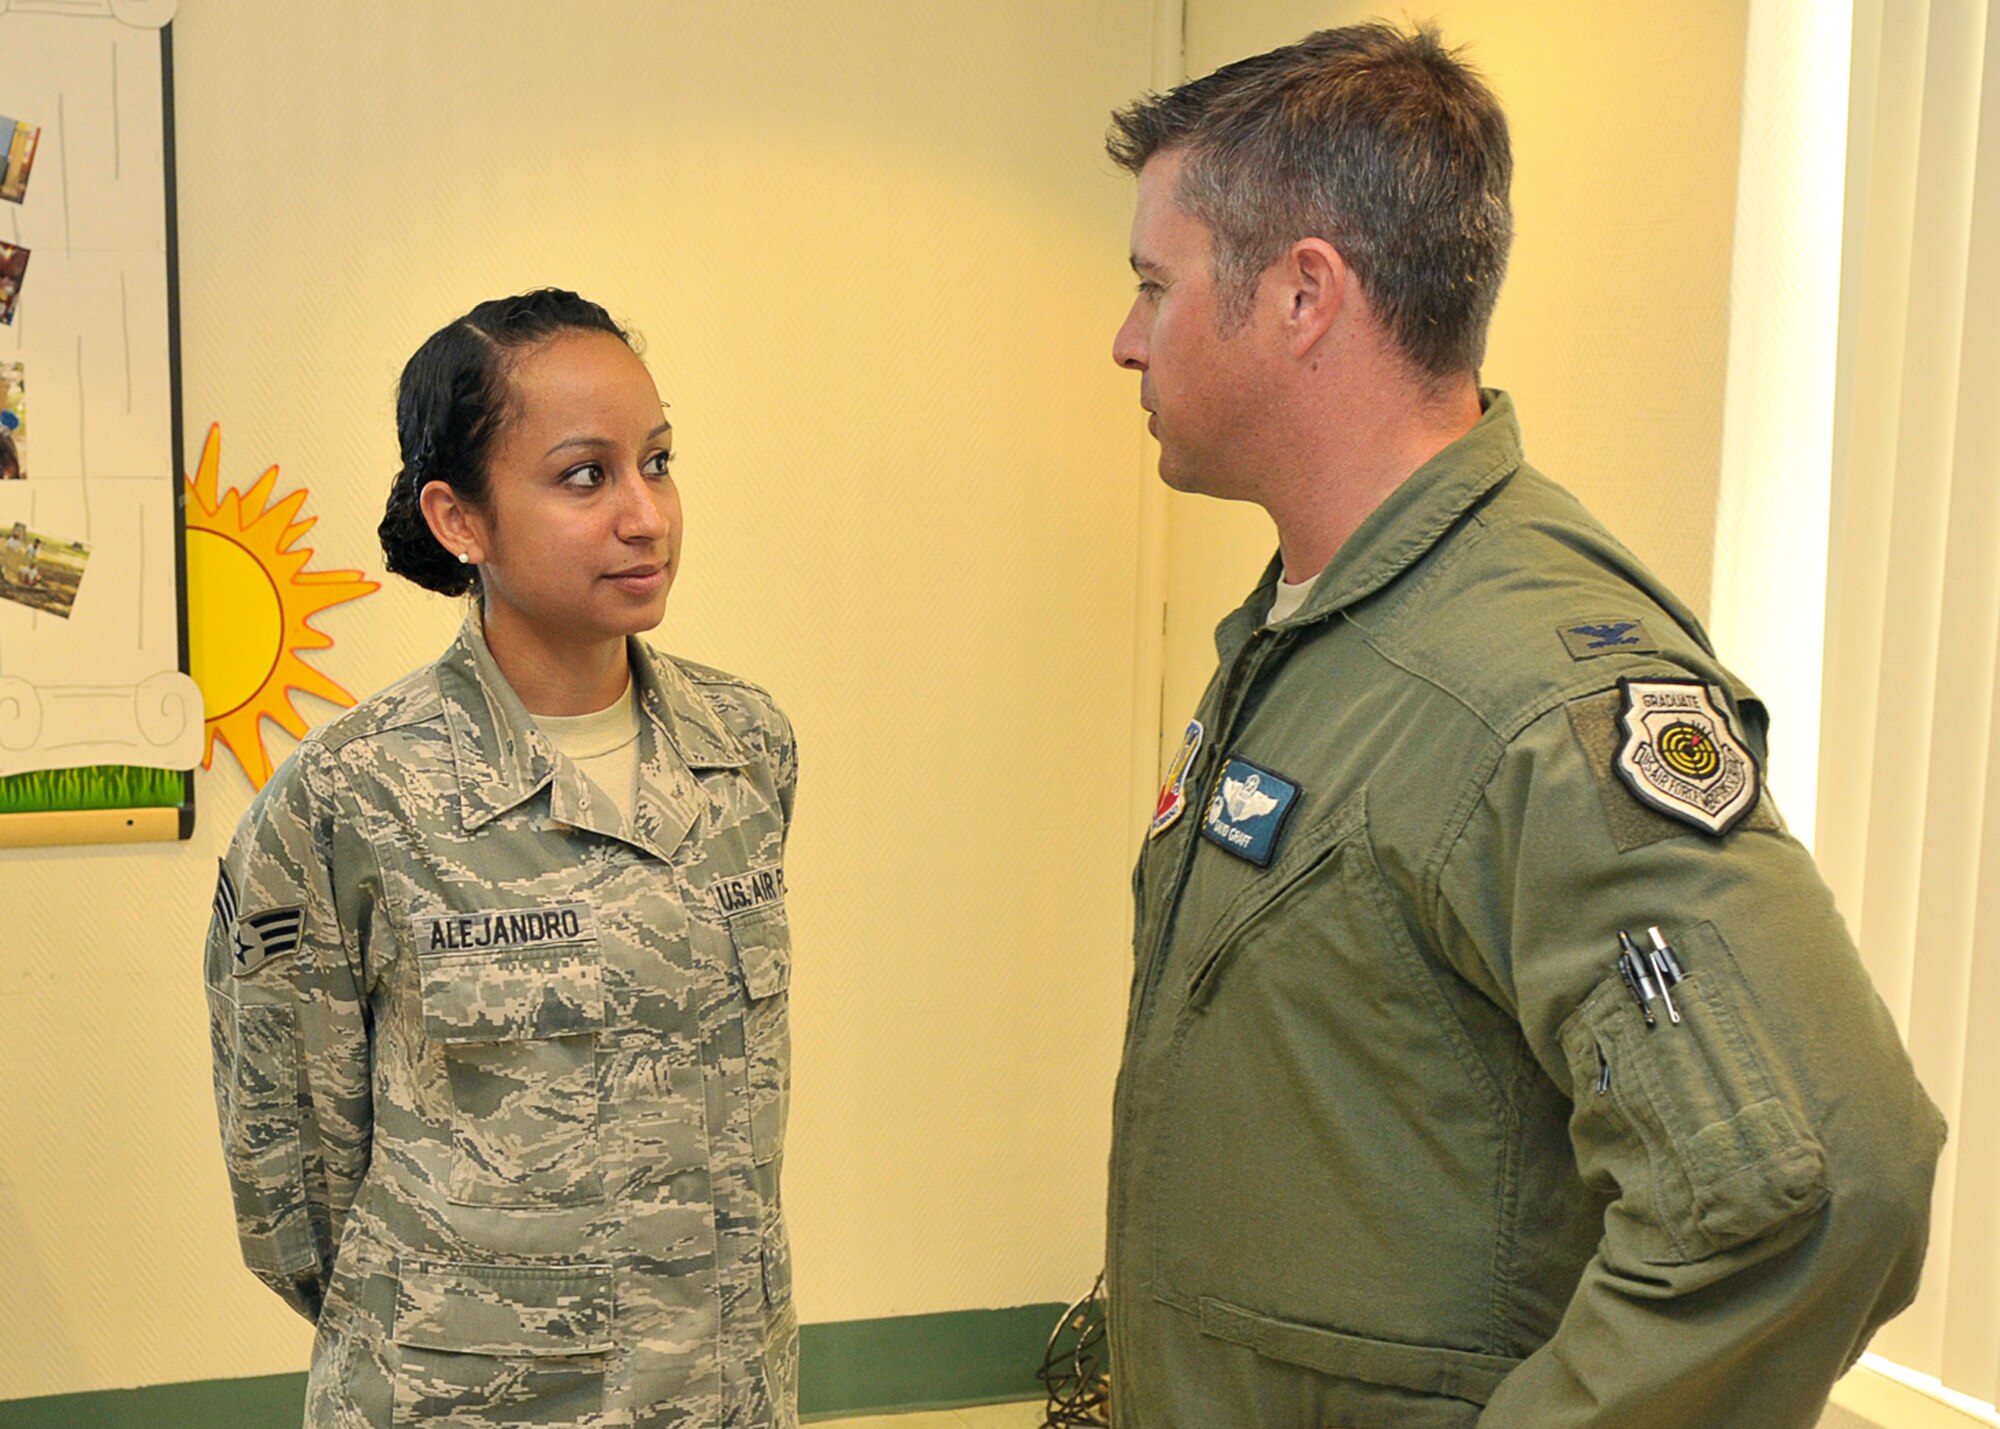 Senior Airman Sasha Alejandro, 325th Force Support Squadron force management technician speaks with Col. David E. Graff, 325th Fighter Wing commander Oct. 25 at Chapel 2. Colonel Graff congratulates Airman Alejandro for the successful turnout of the Hispanic Heritage Month luncheon. (U.S. Air Force photo by Airman 1st Class Sergio A. Gamboa)